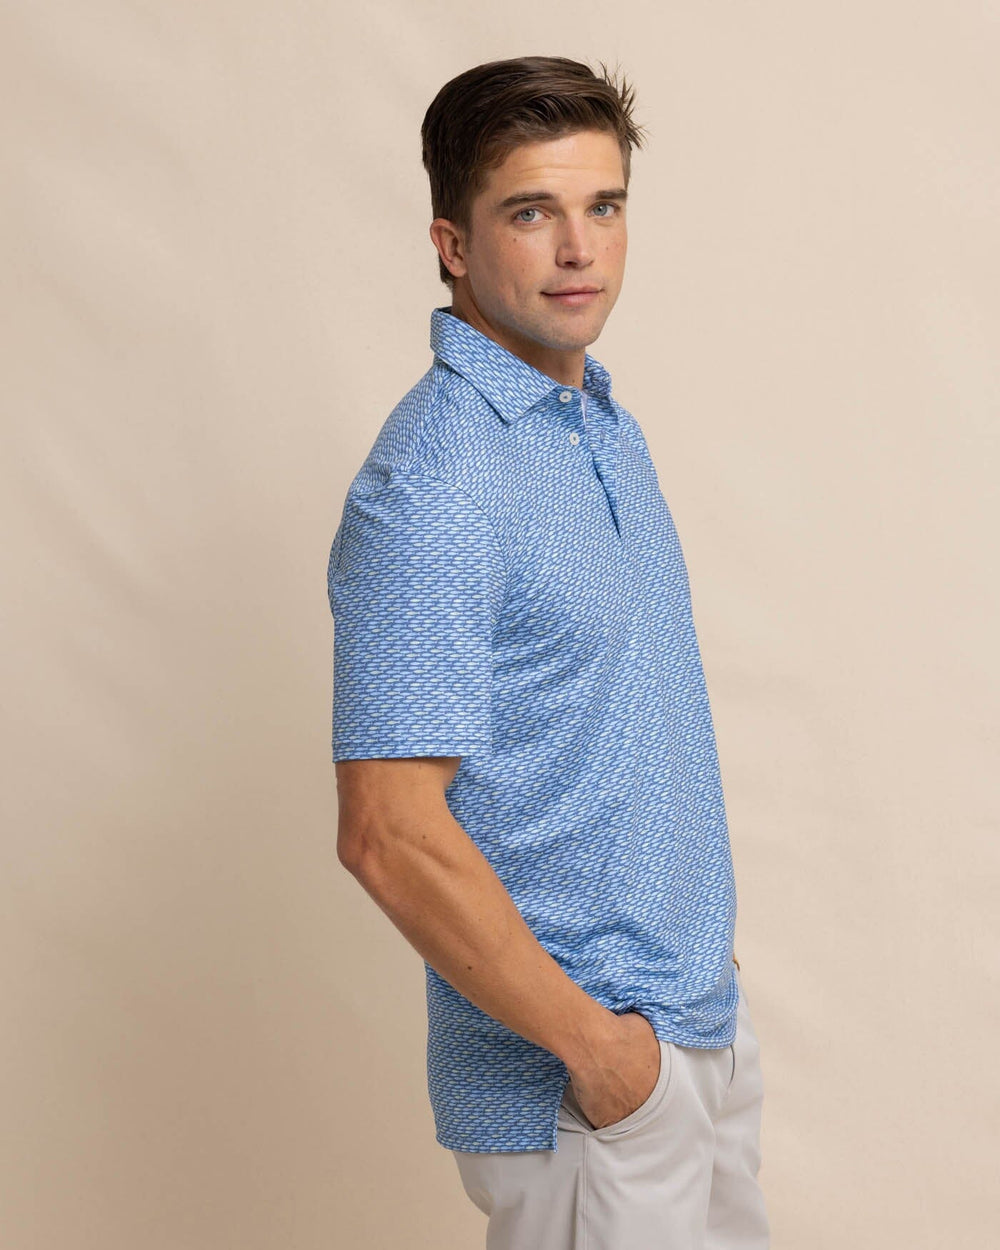 The front view of the Southern Tide Driver Casual Water Printed Polo by Southern Tide - Coronet Blue